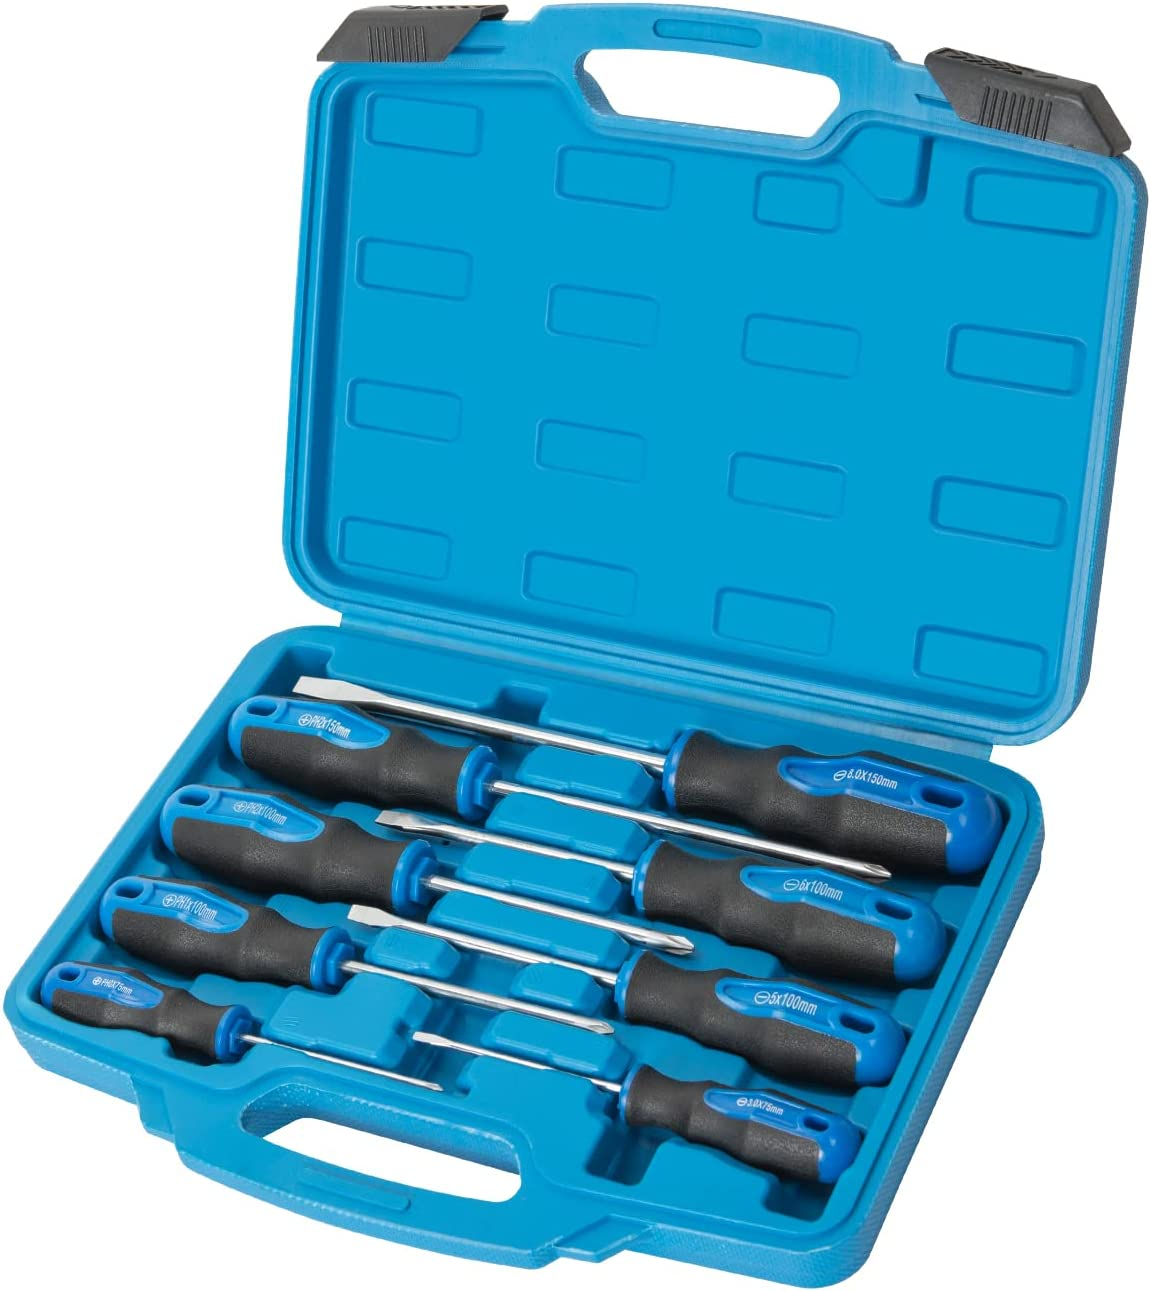 8-Piece Magnetic Screwdrivers Set, Nichrome Tip 4 Phillips and 4 Slotted Tips - $40.11